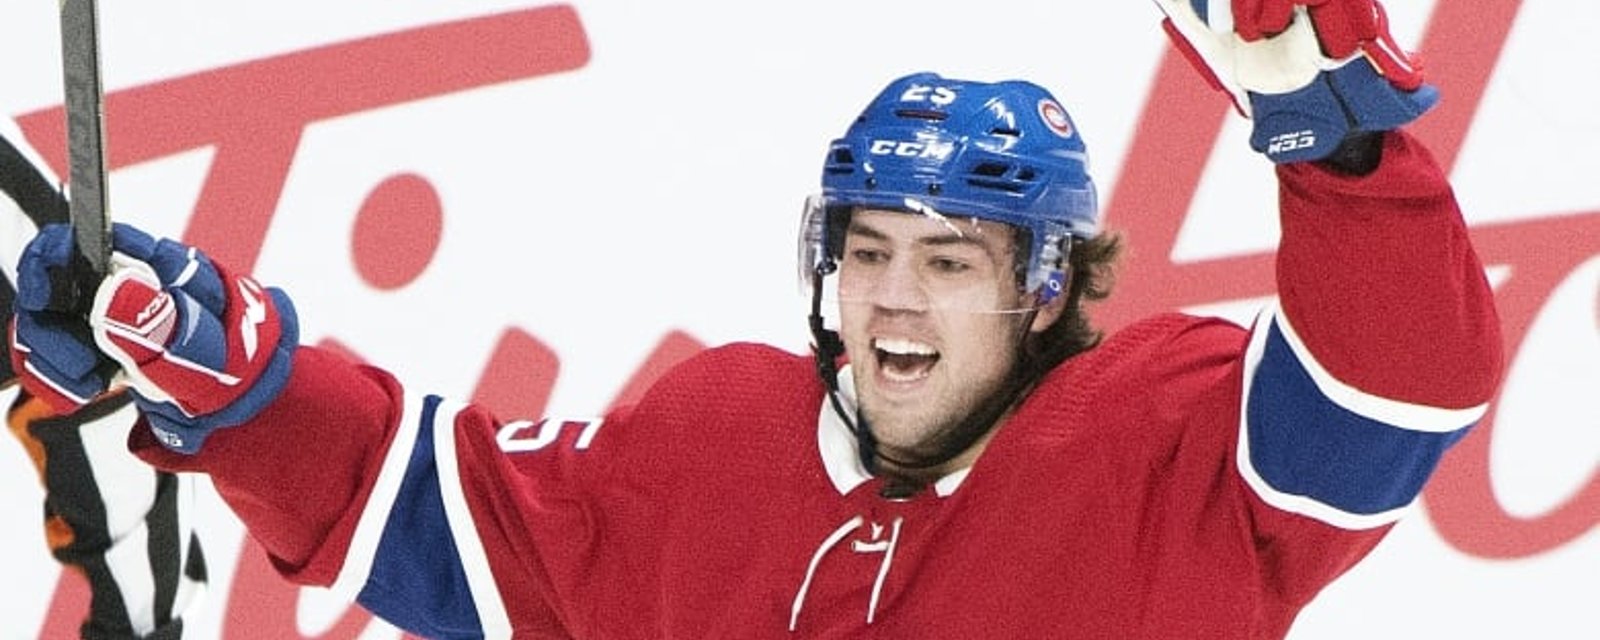 Habs rookie Poehling gets scared of Montreal fans! 